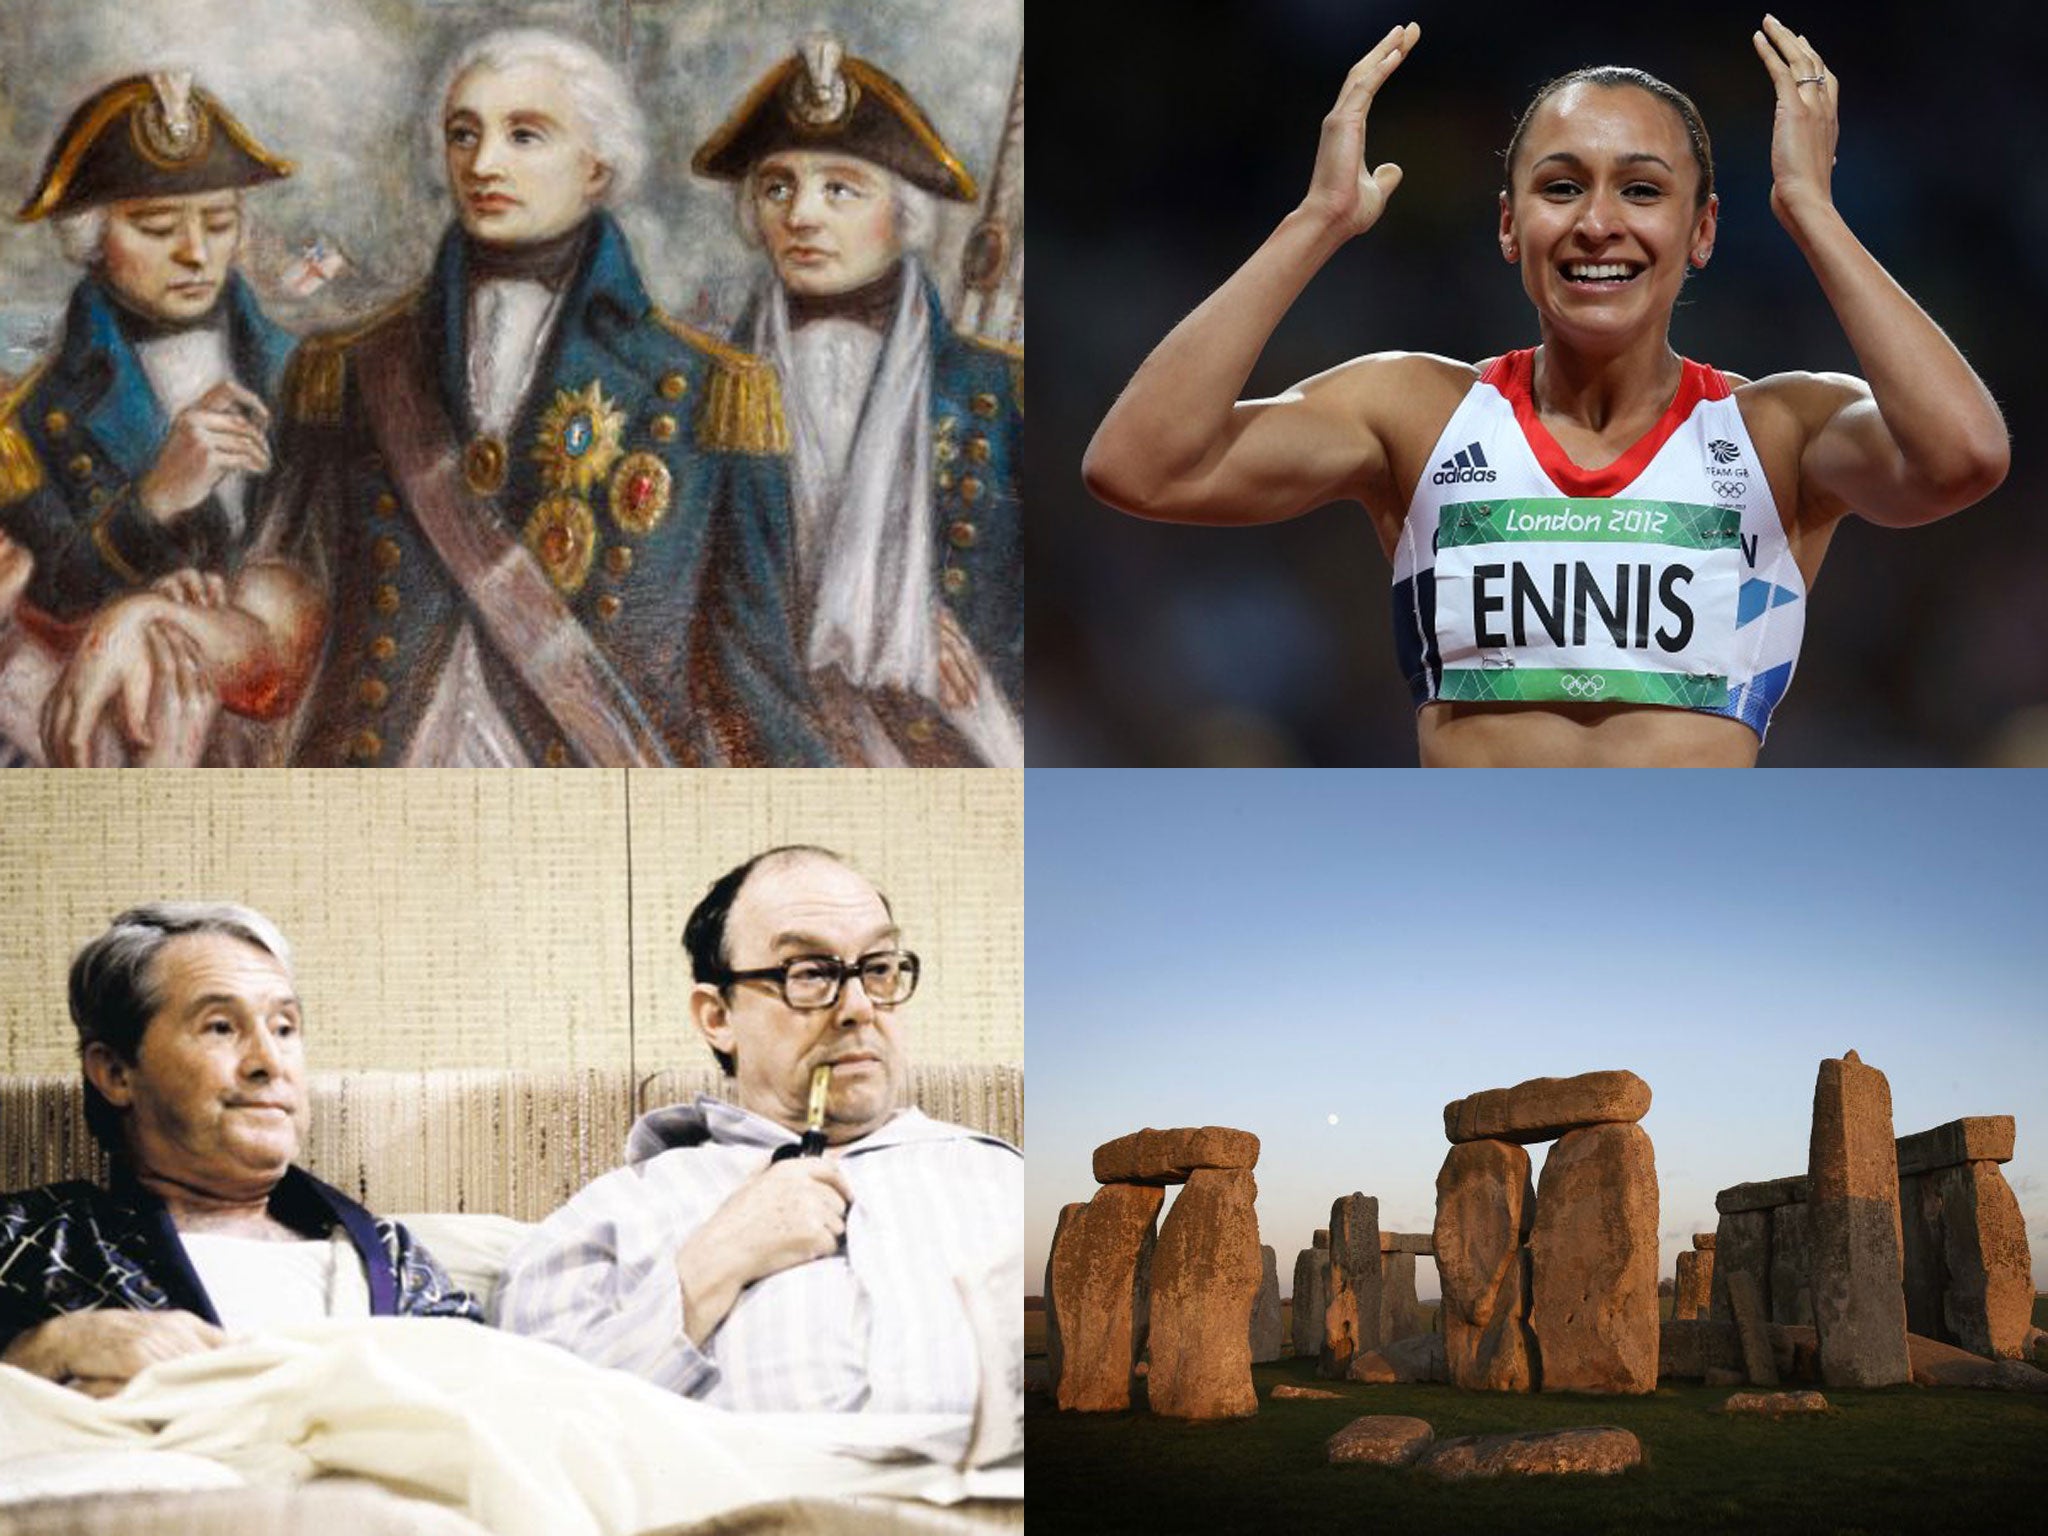 Clockwise from top-left: Admiral Nelson, Jessica Ennis at the London Olympics, Stonehenge, and Morecambe and Wise